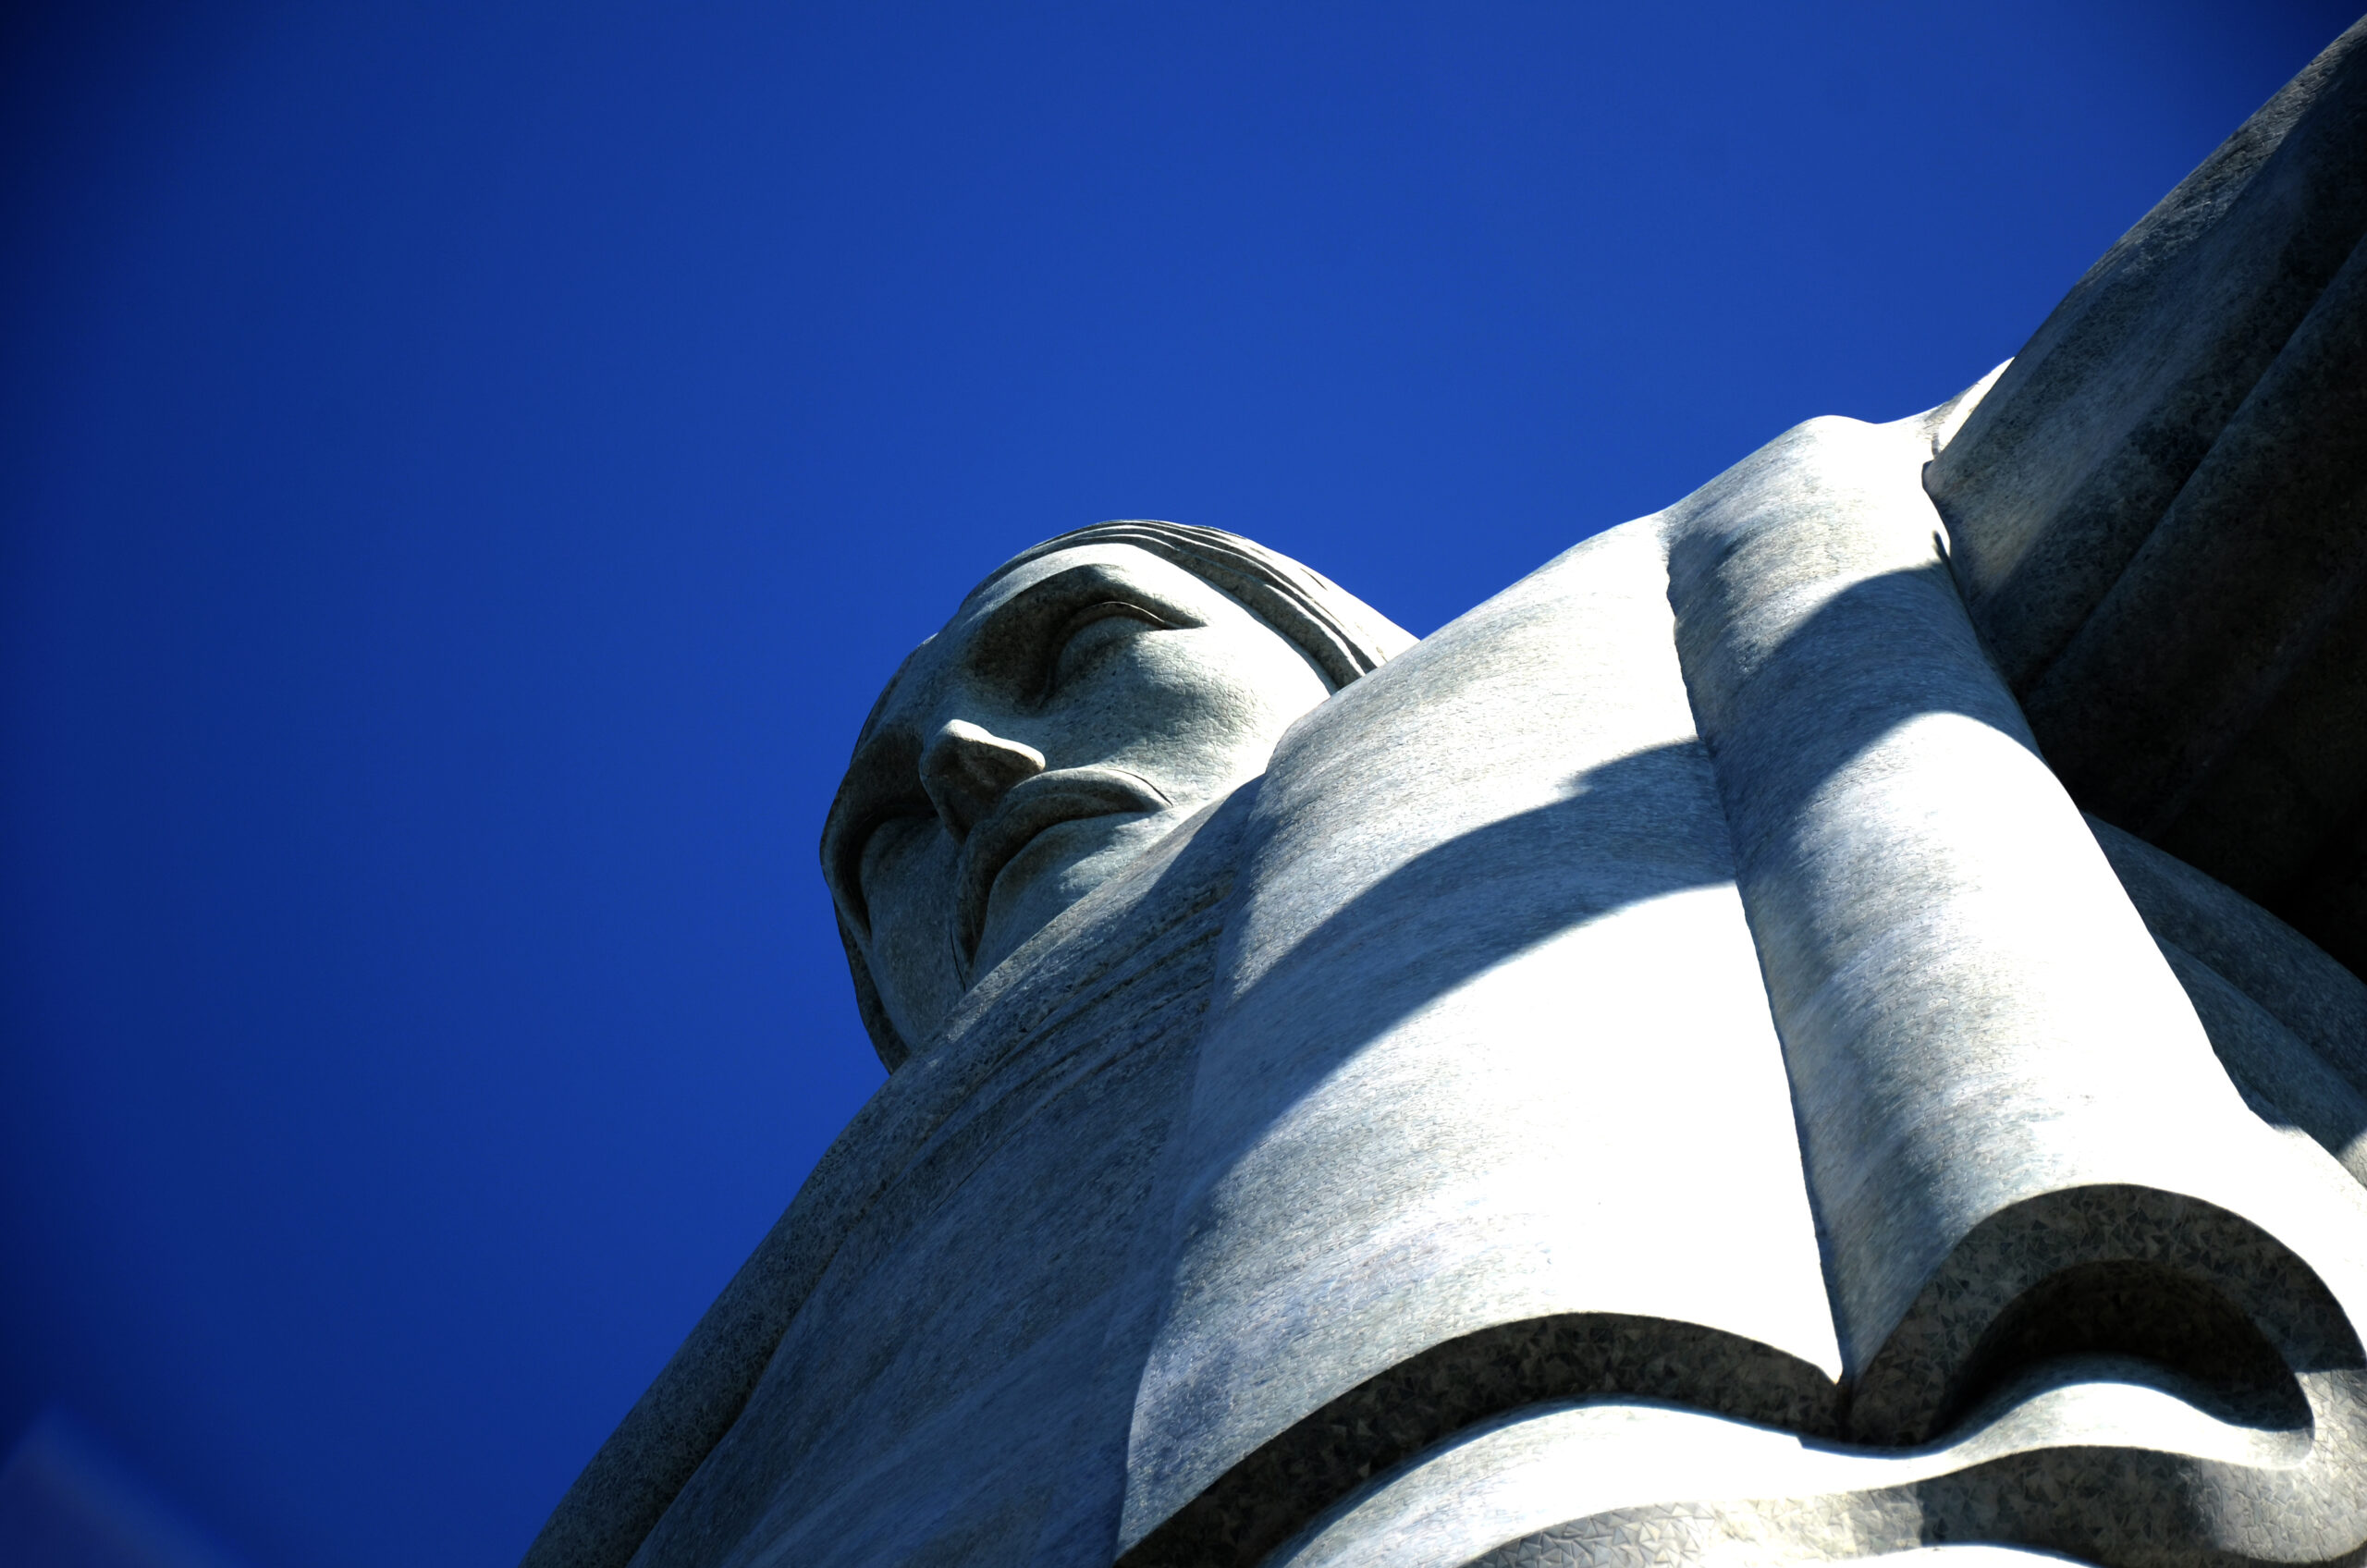 Low Angle picture of theChrist the Redeemer Statue in Rio de JaneiroBrazil